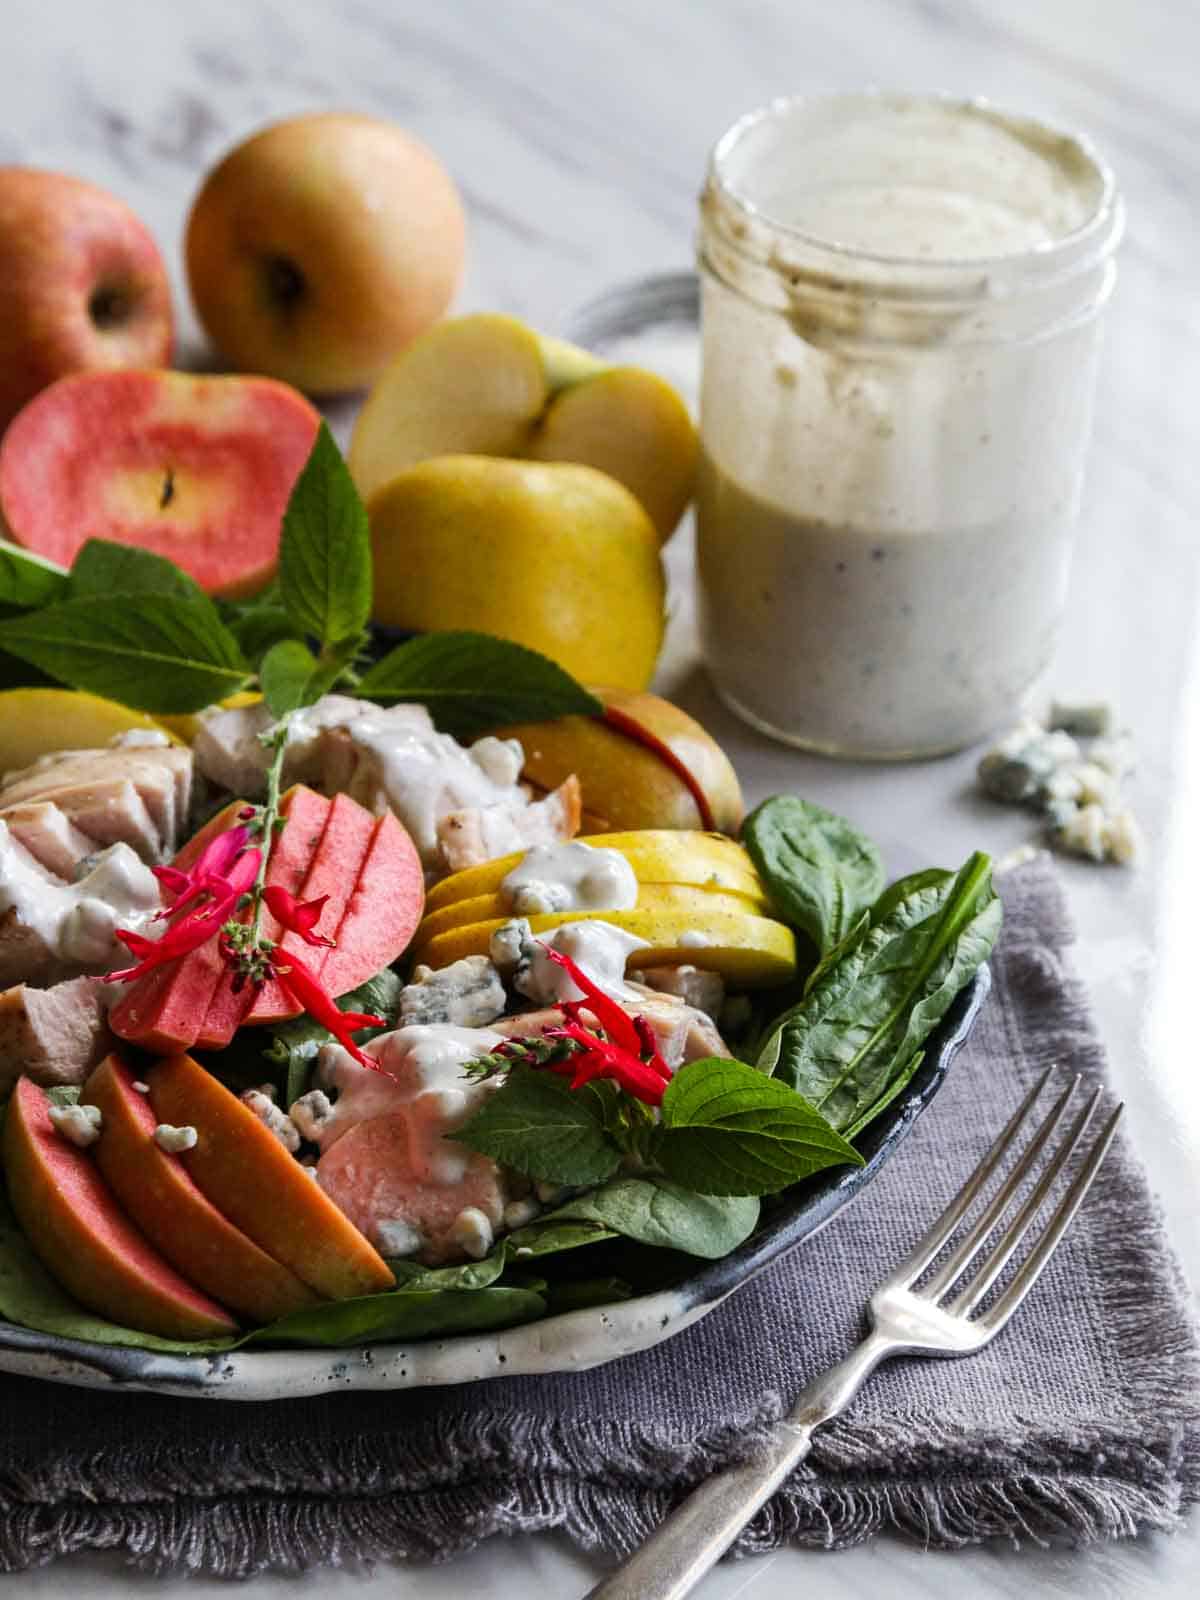 An open jar of blue cheese dressing next to apples and a plate of sliced chicken salad.